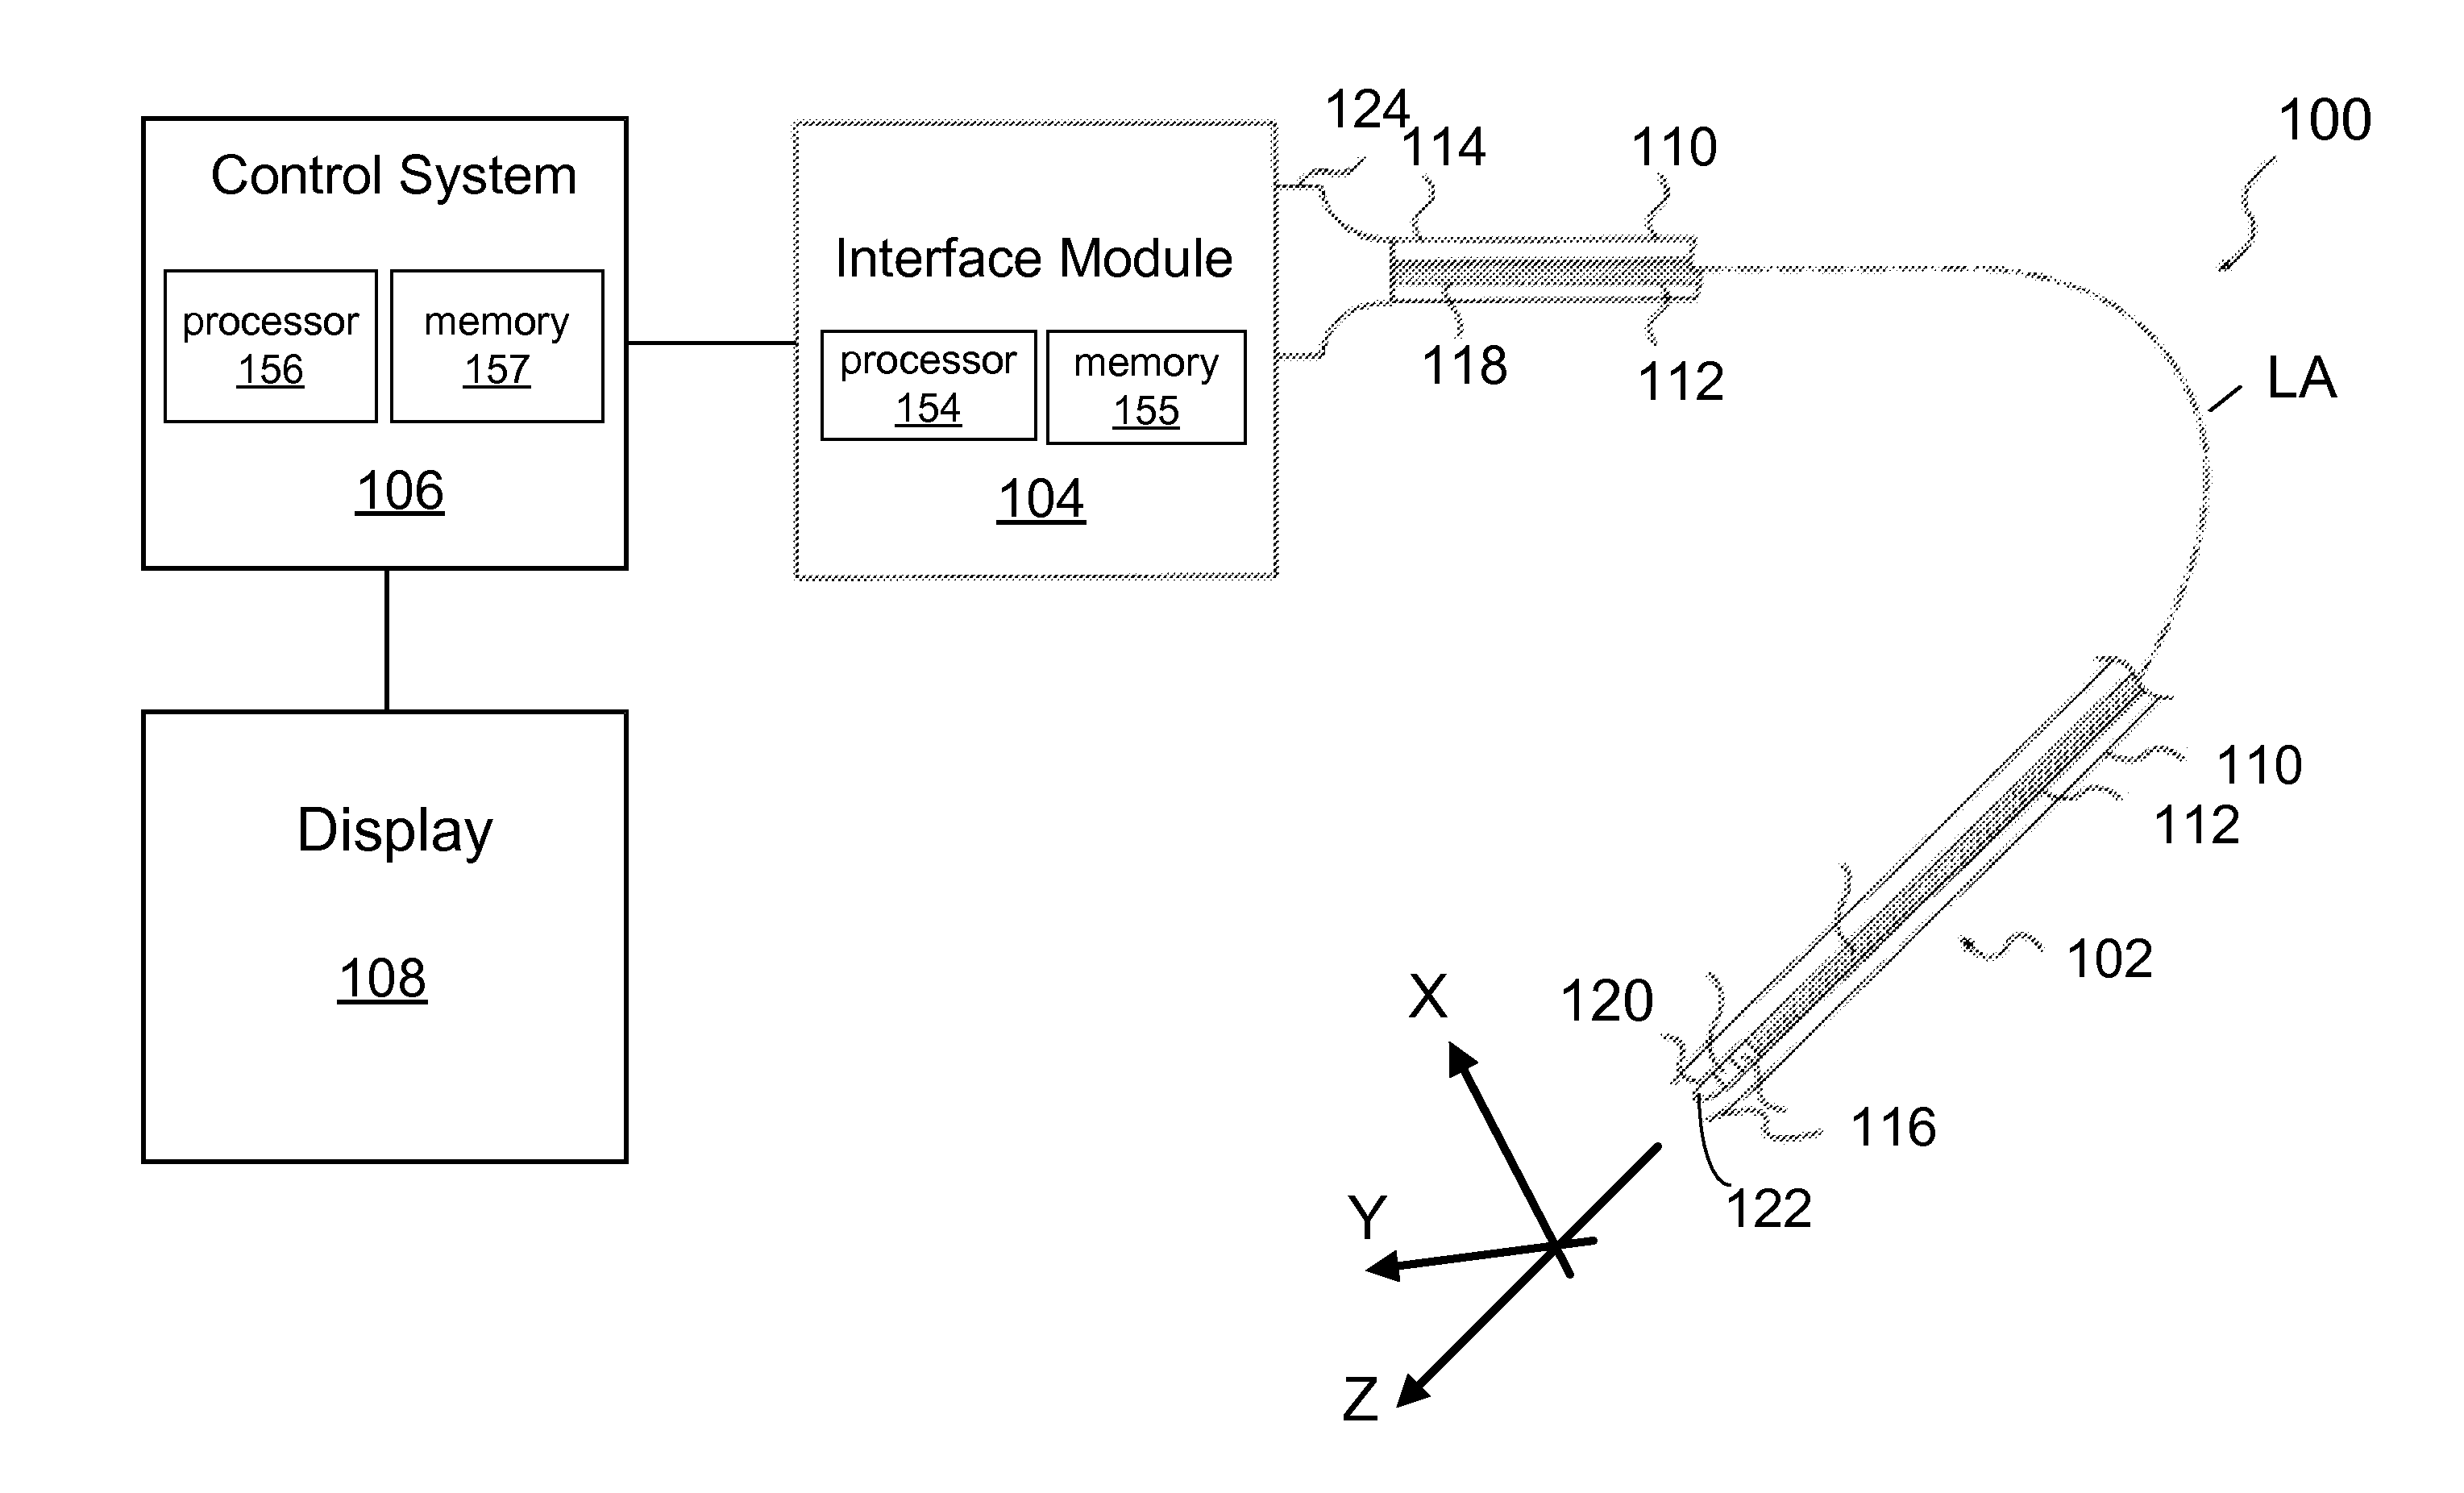 Method for Multi-Frequency Imaging and Composite Image Display Using High-Bandwidth Transducer Outputs